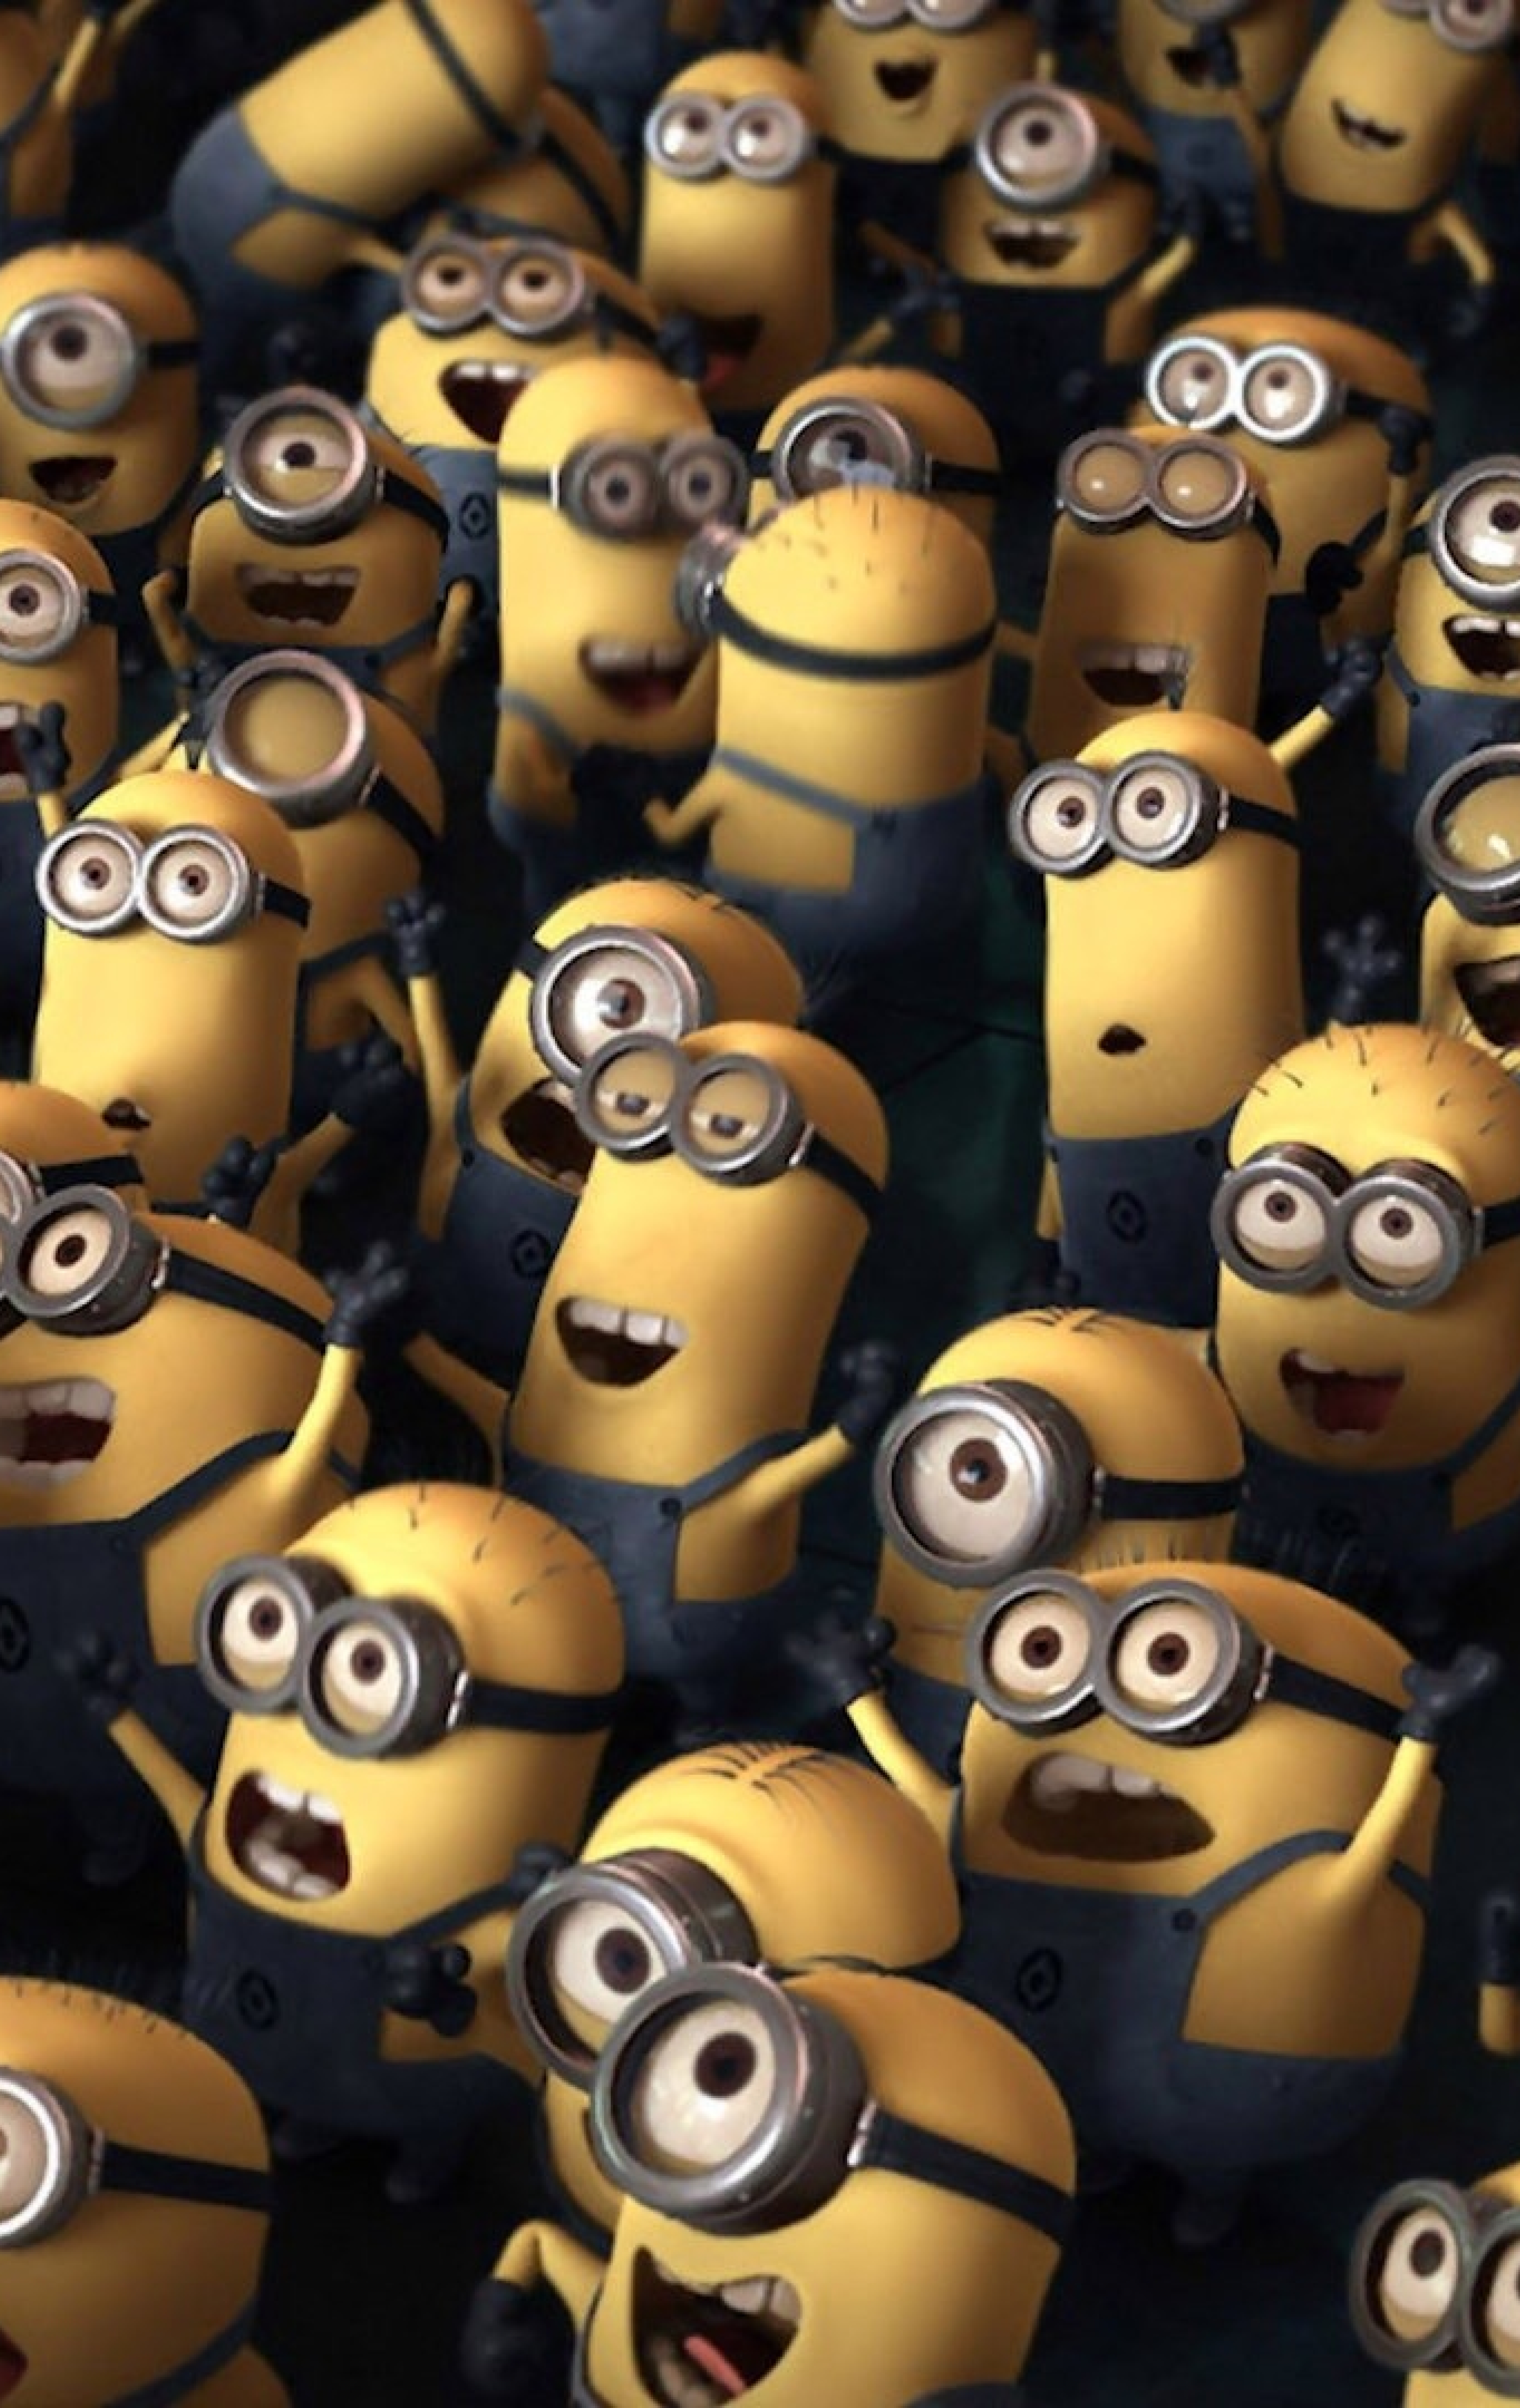 Create meme minions  the Wallpapers HD minions minions on the desktop   Pictures  Memearsenalcom